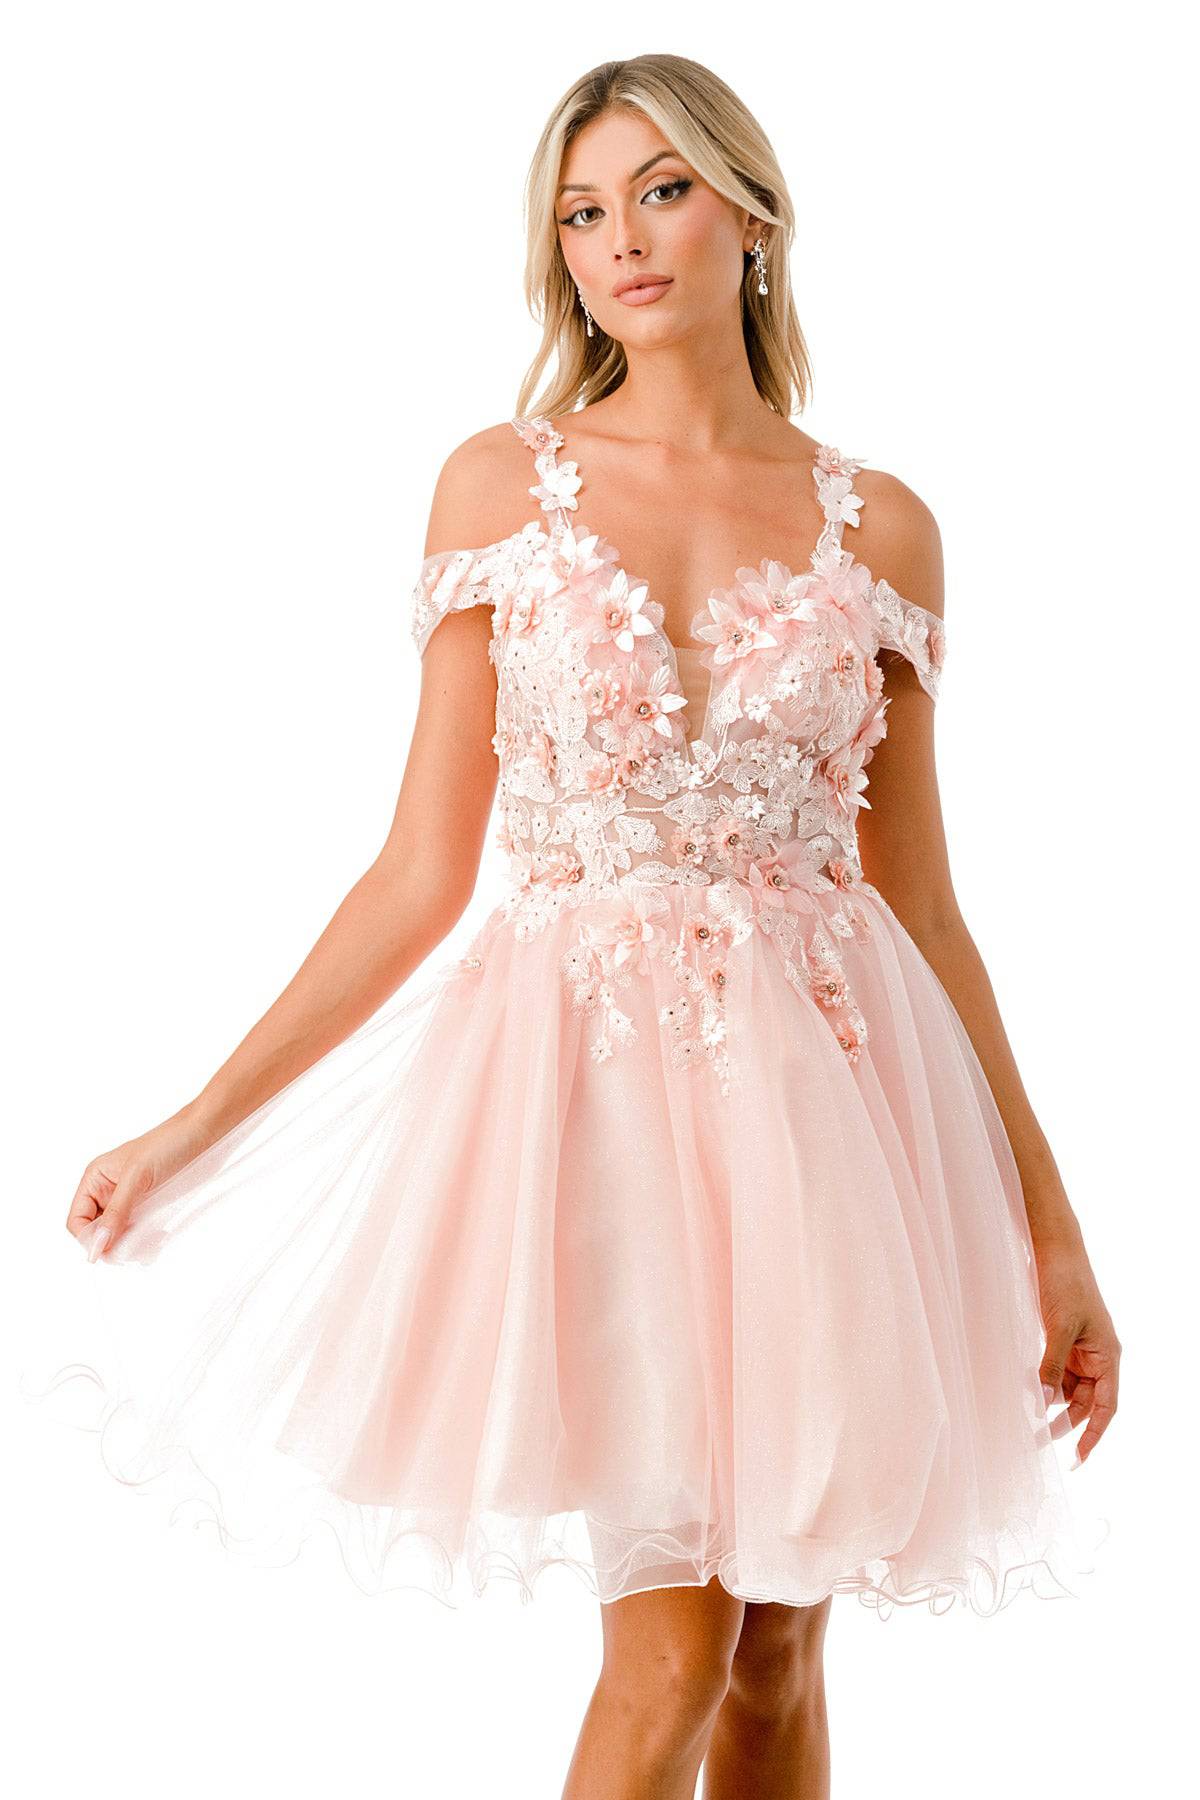 Aspeed S2713 Short Dress with Floral Embroidery & Tulle Skirt - NORMA REED